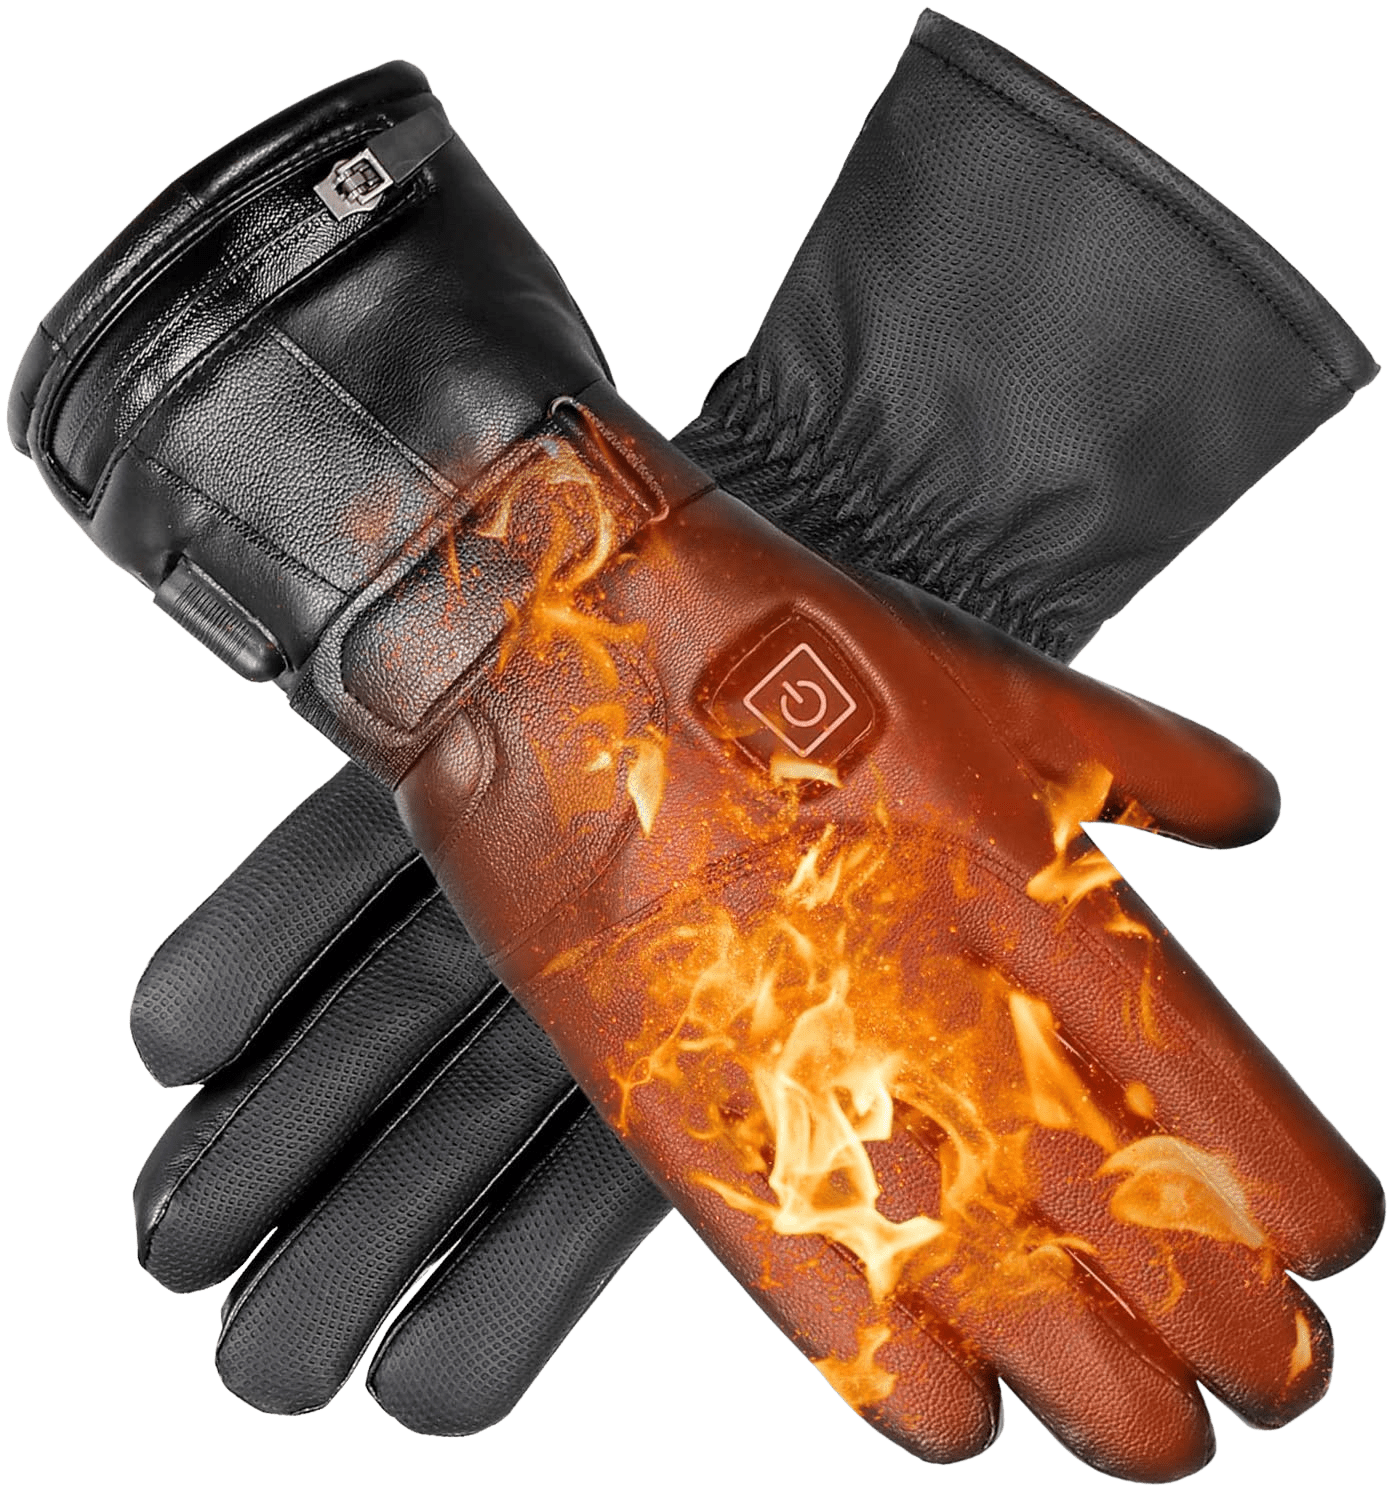 upstartech Heated Gloves 7.4V 4000mAh Winter Gloves Hand Warmers with 3 Levels Temperature Control Touchscreen Heated Leather Gloves for Cycling Motorcycle Skiing Fishing - Home Decor Gifts and More